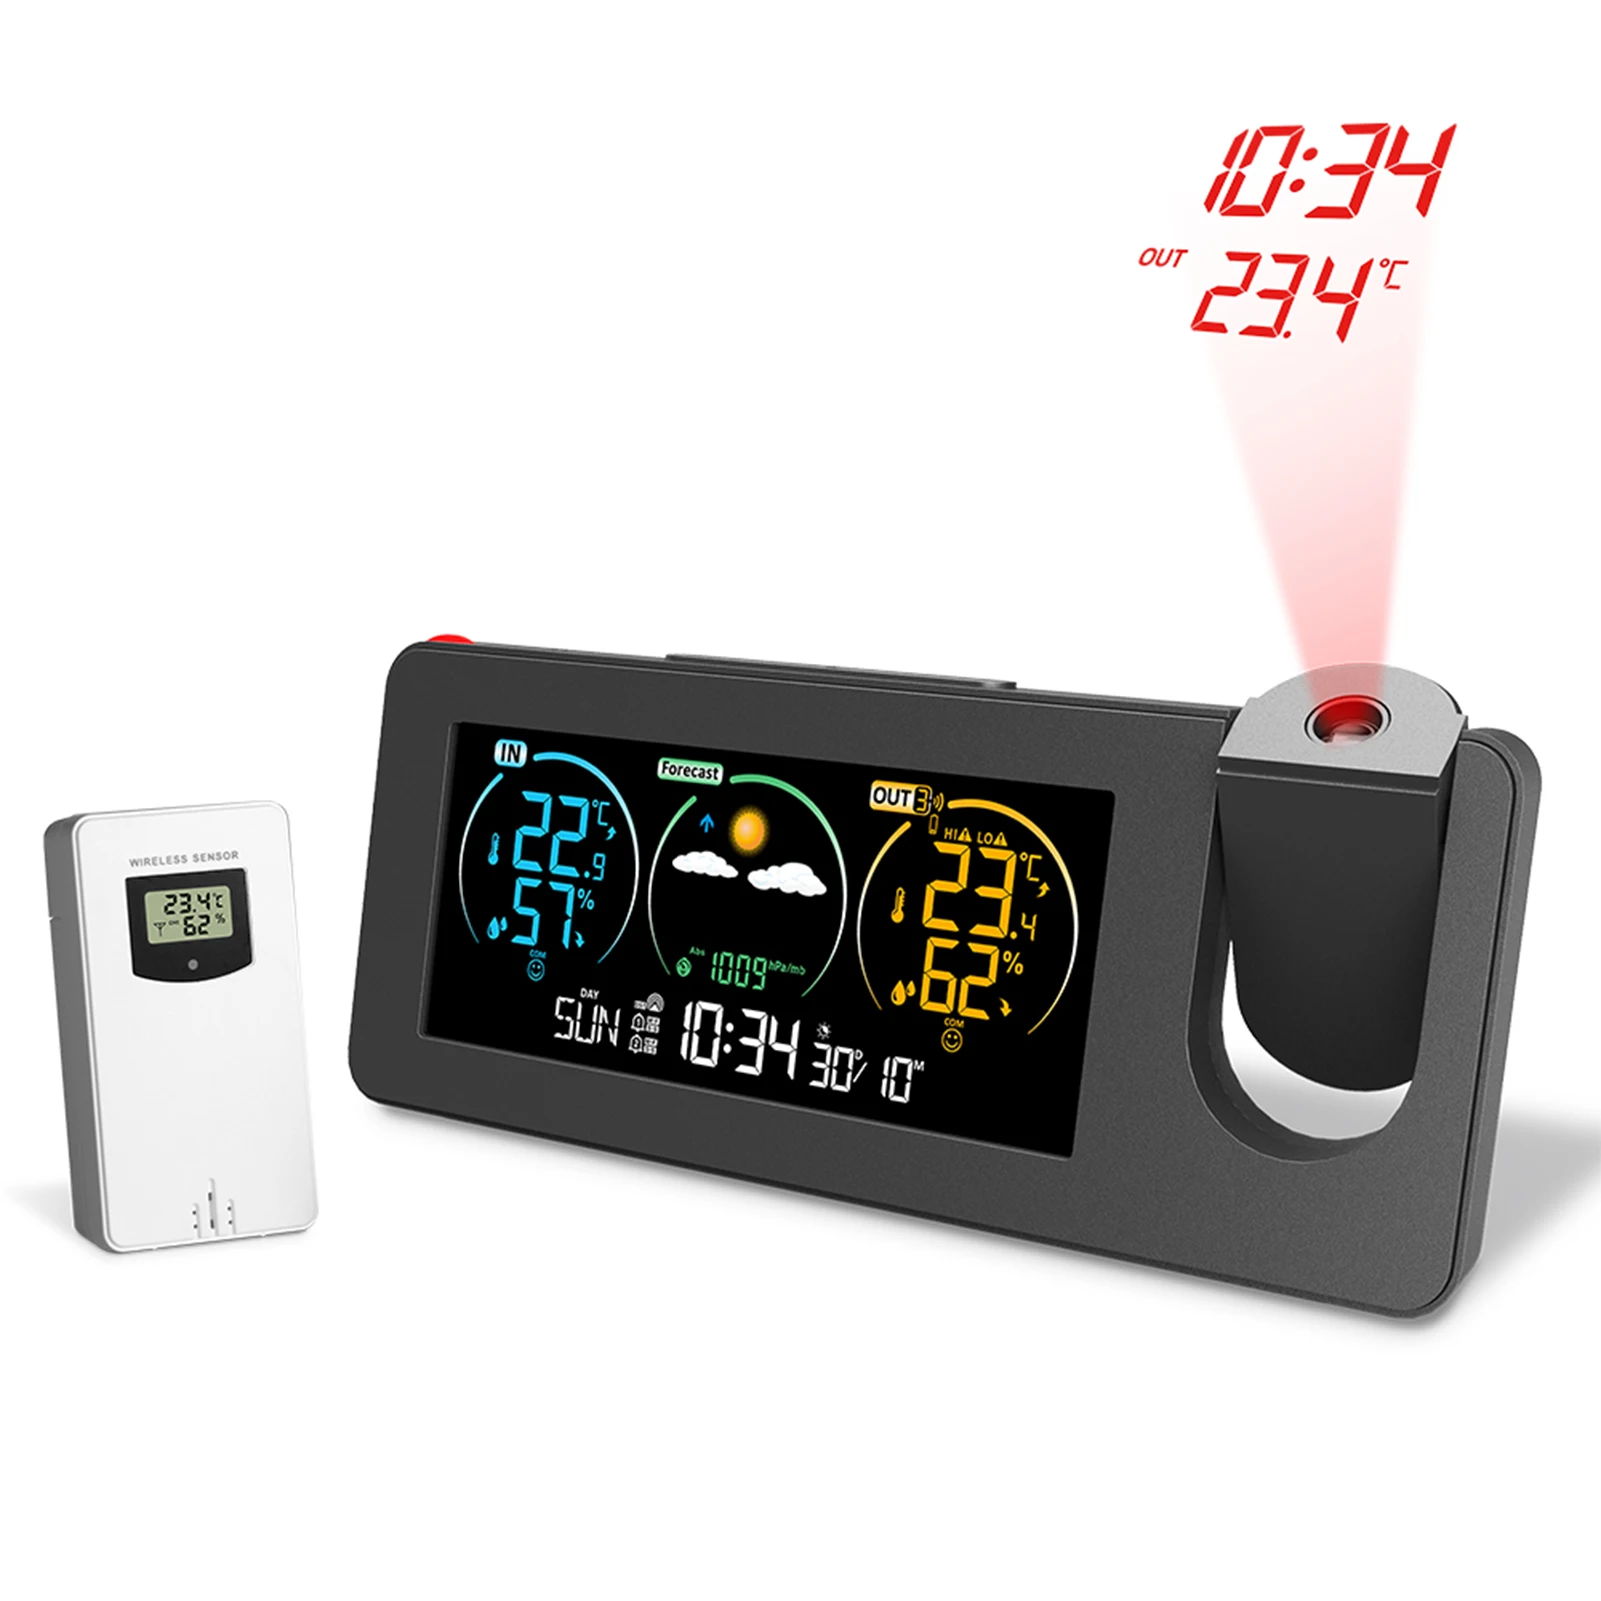 https://ae01.alicdn.com/kf/S9a63d1b66f2e4be48e76cc28fbe9e8889/Thermometer-Digital-with-Sensor-Weather-Station-Wireless-Indoor-Outdoor-Weather-Forecast-Thermo-hygrometer-Projection-Clock.jpg